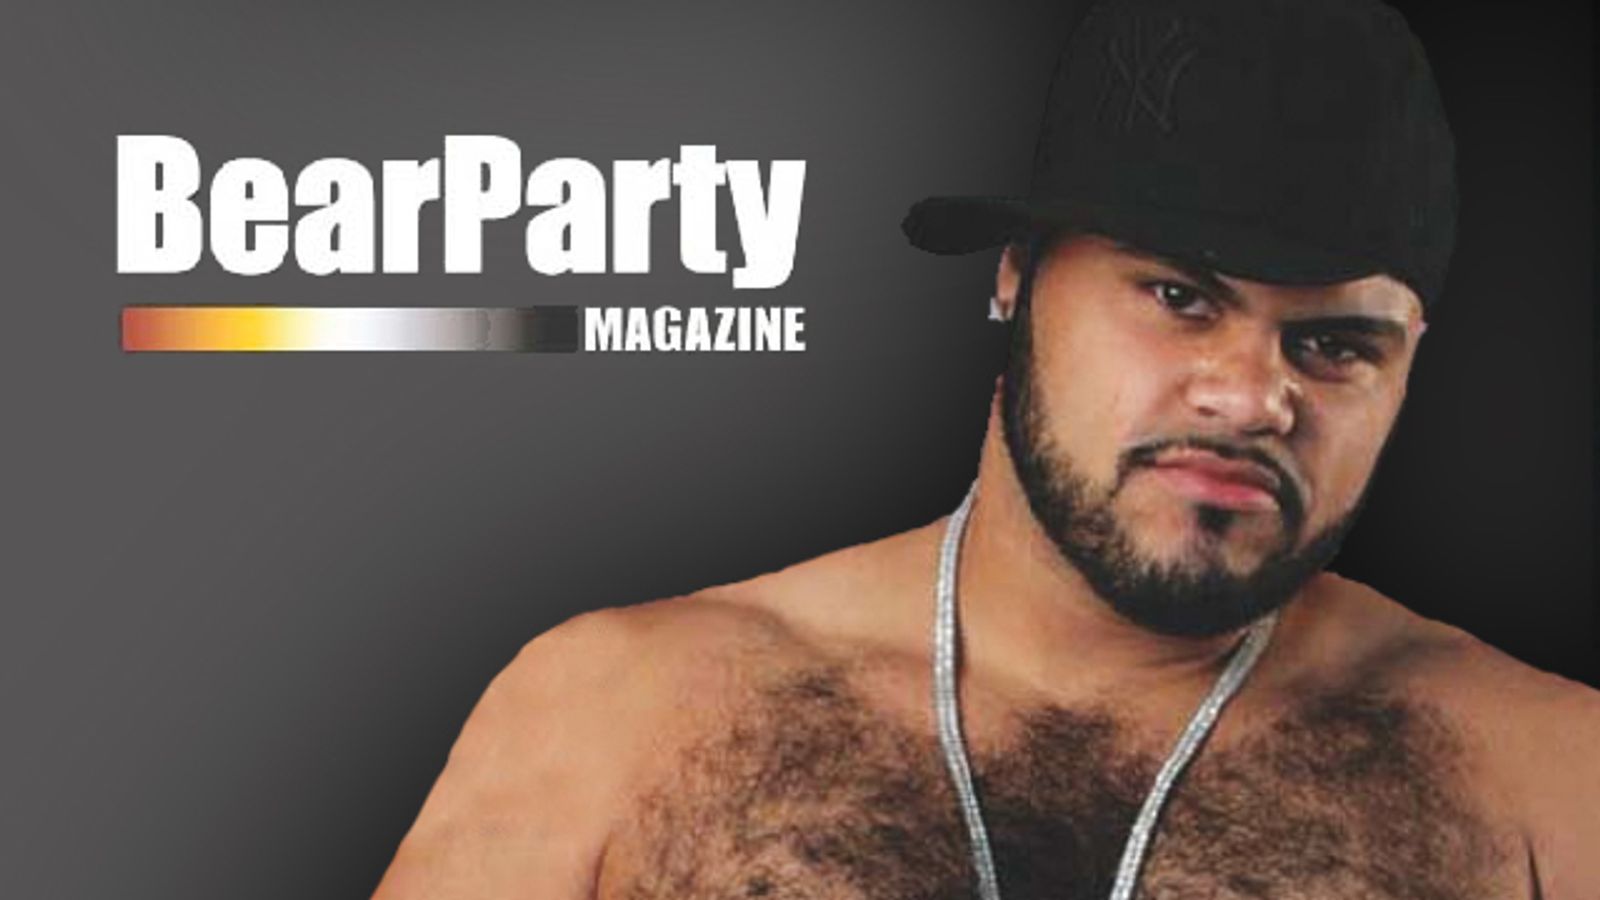 'BearParty Magazine' Refines its Focus in Third Year